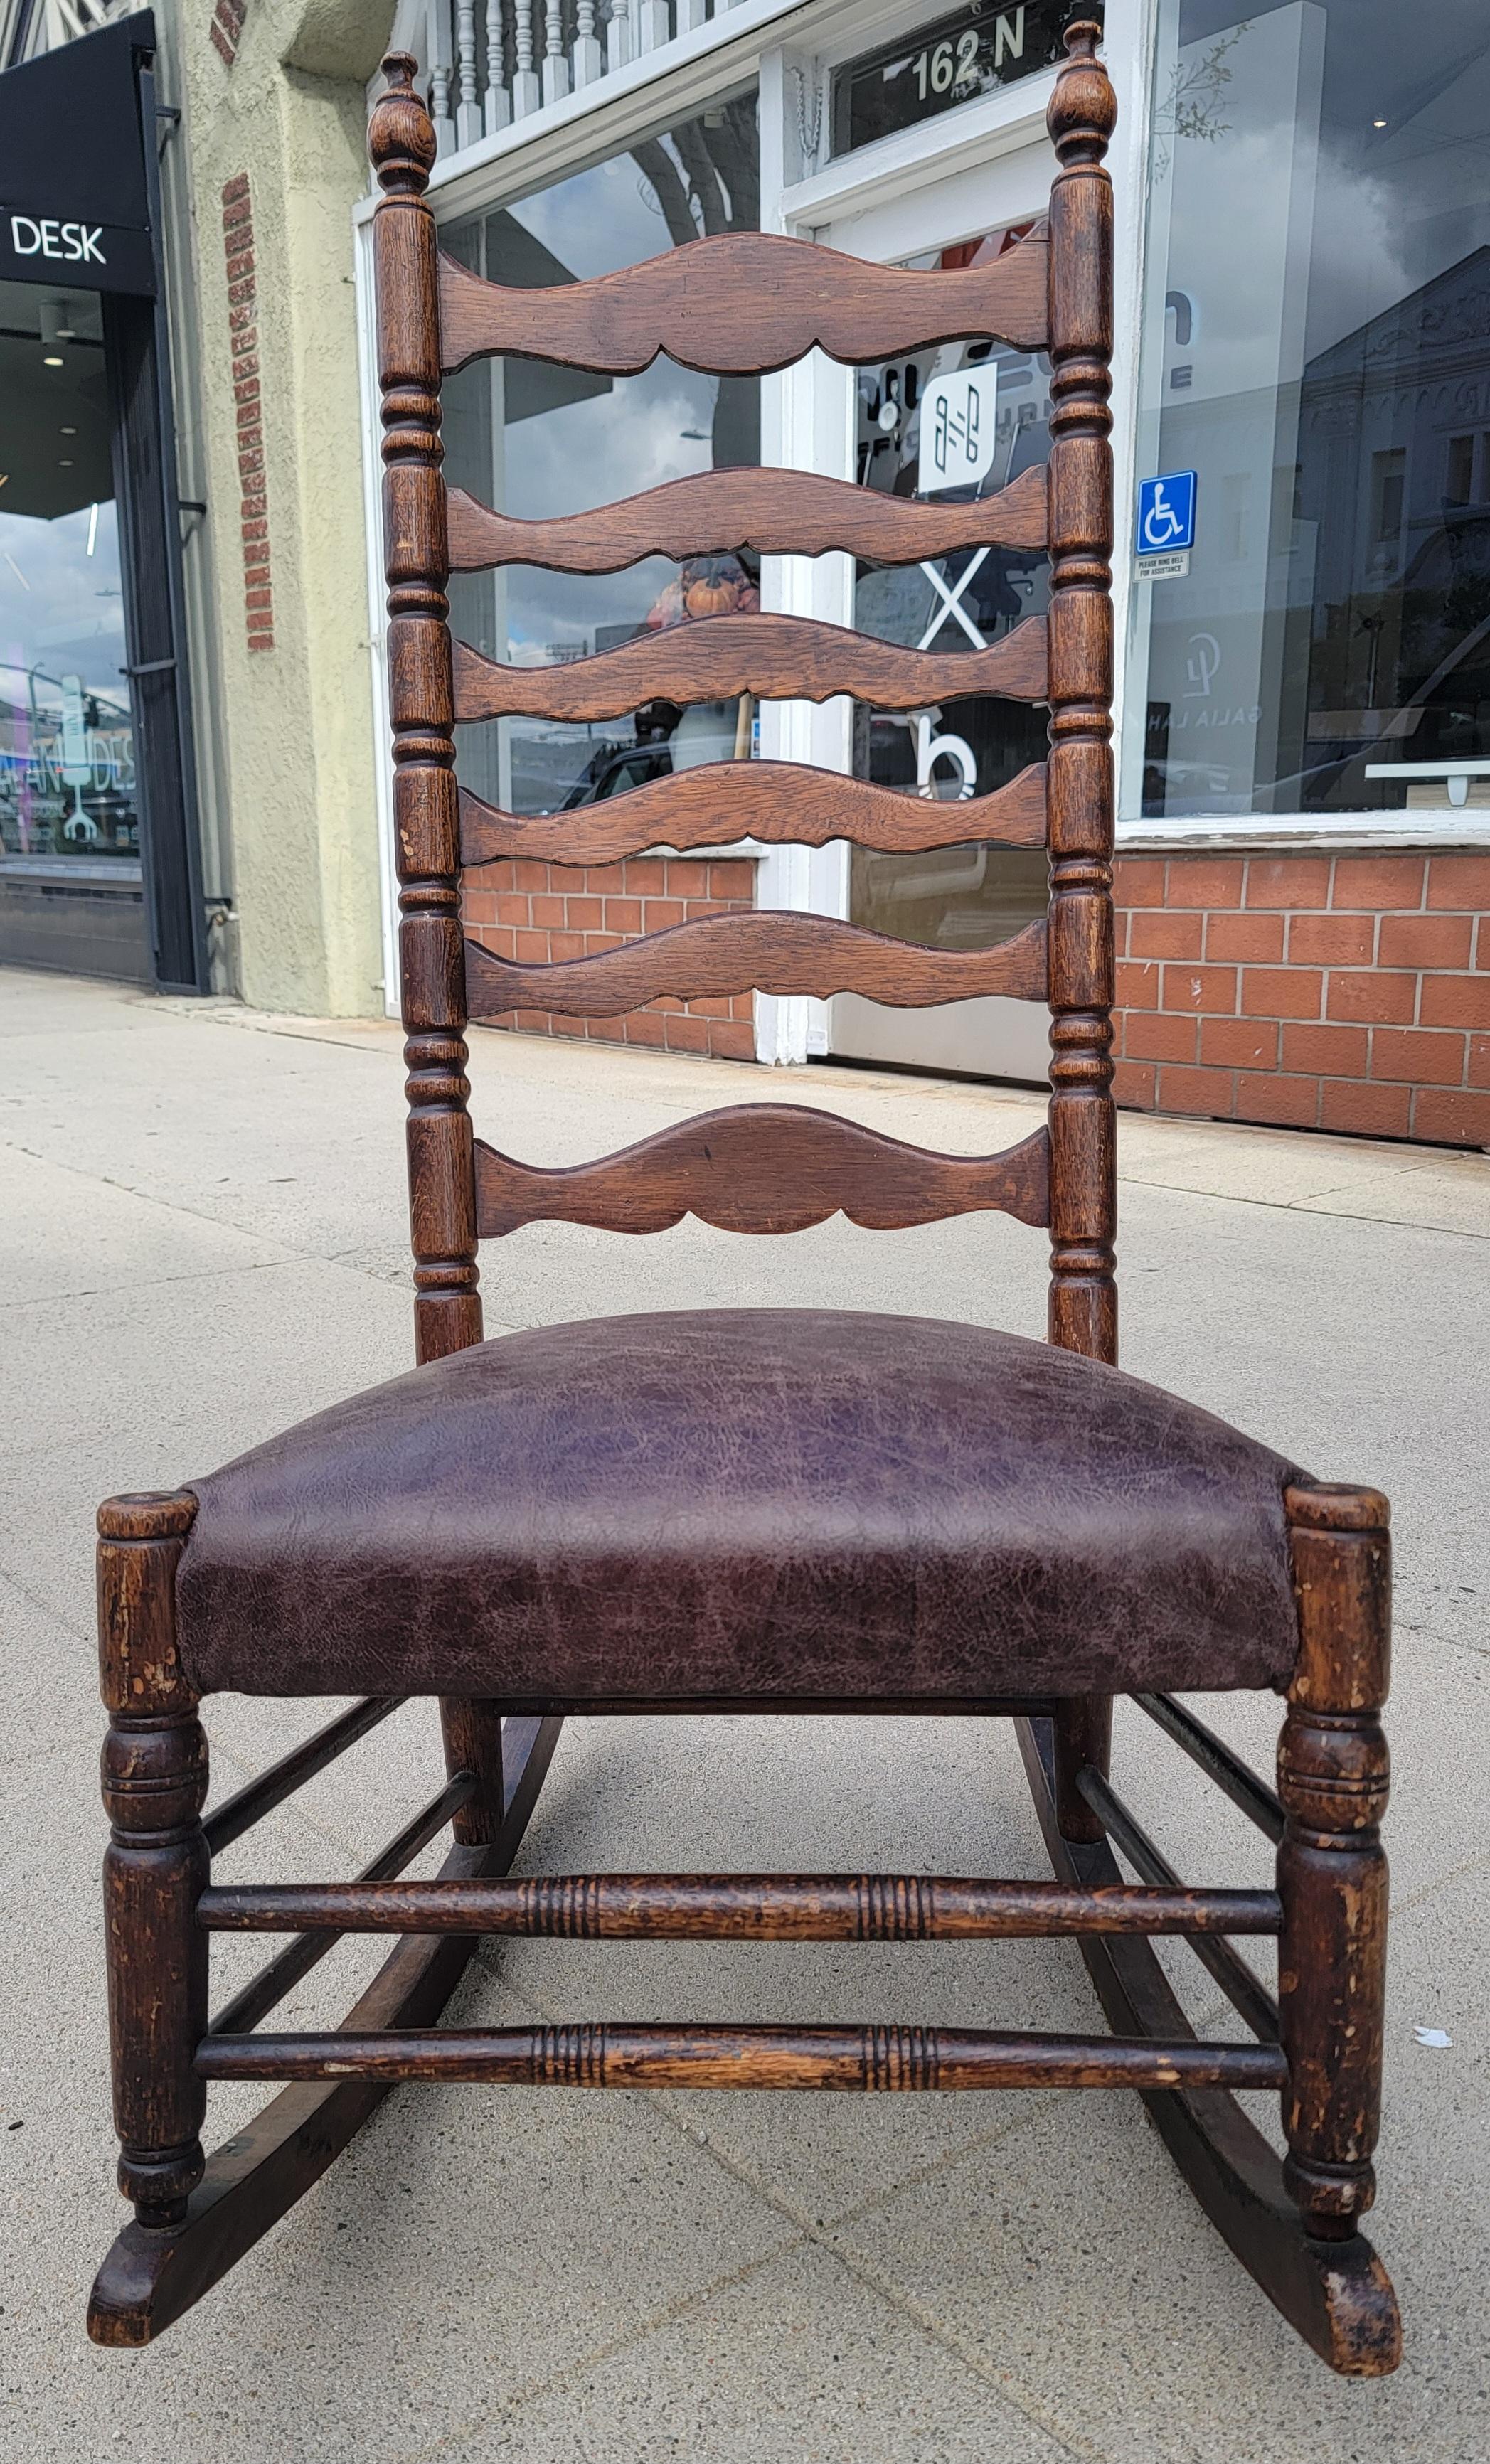 19Thc Early New England tall ladder back rocking chair with leather seat.This amazing rocking chair has a fine aged patina. and is very comfortable.The condition is very good.